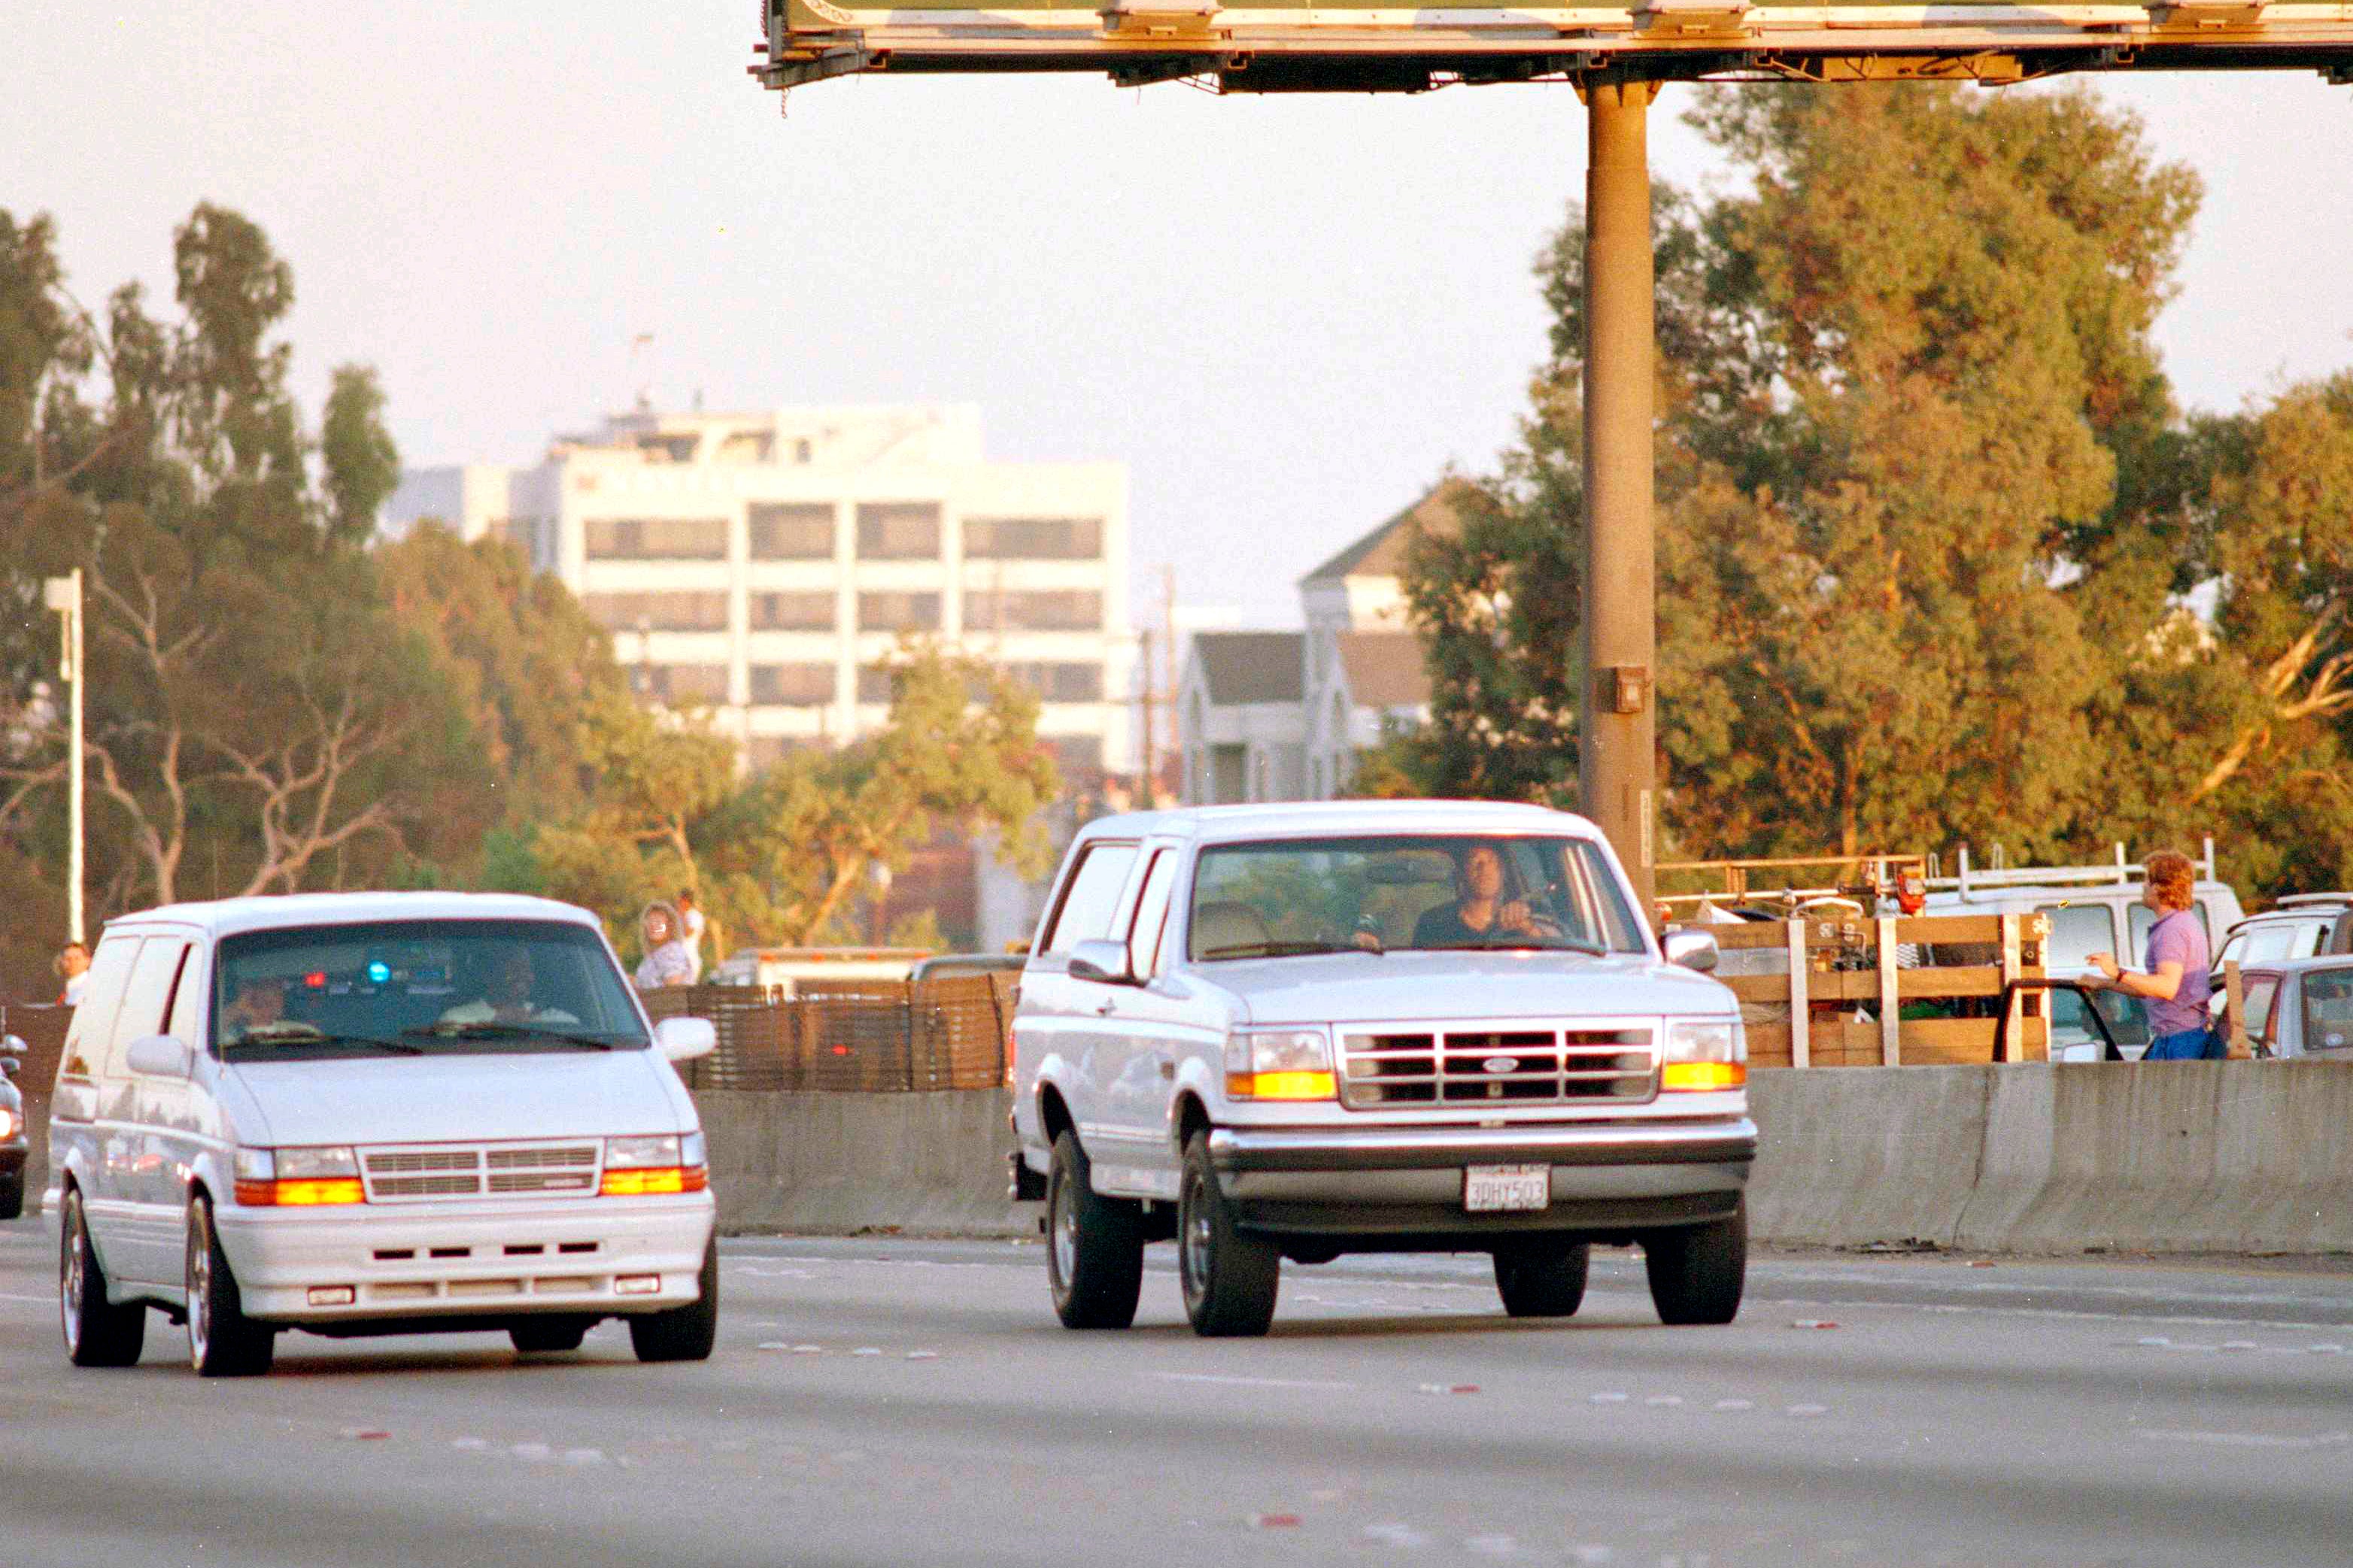 Al Cowlings, with OJ Simpson hiding, drives a white Ford Bronco as they lead police on a two-county chase along the northbound 405 Freeway towards Simpson’s home, June 17, 1994, in Los Angeles